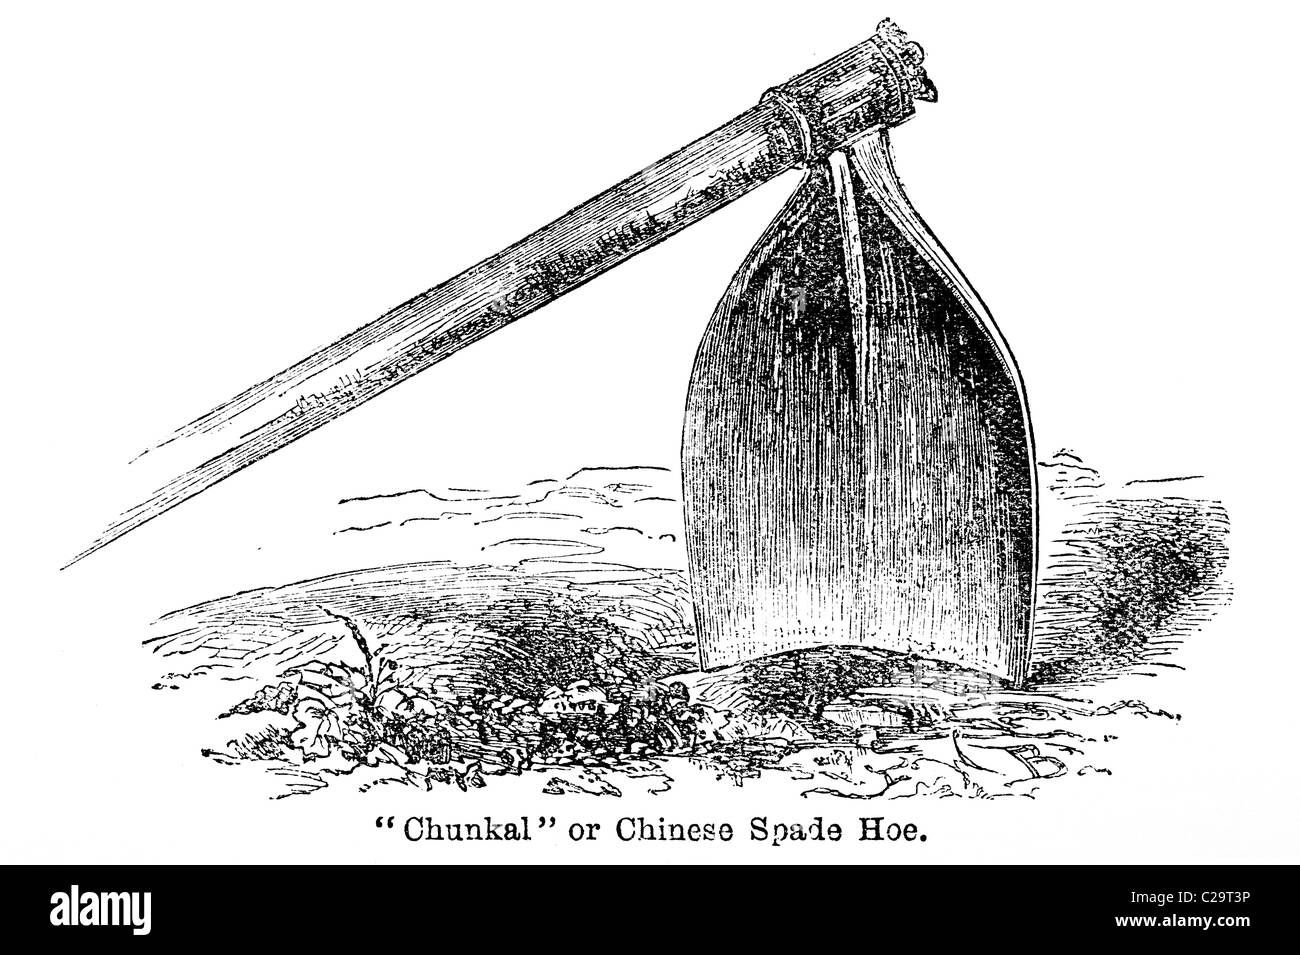 A Chunkal or Chinese Spade Hoe, 19th century illustration Stock Photo